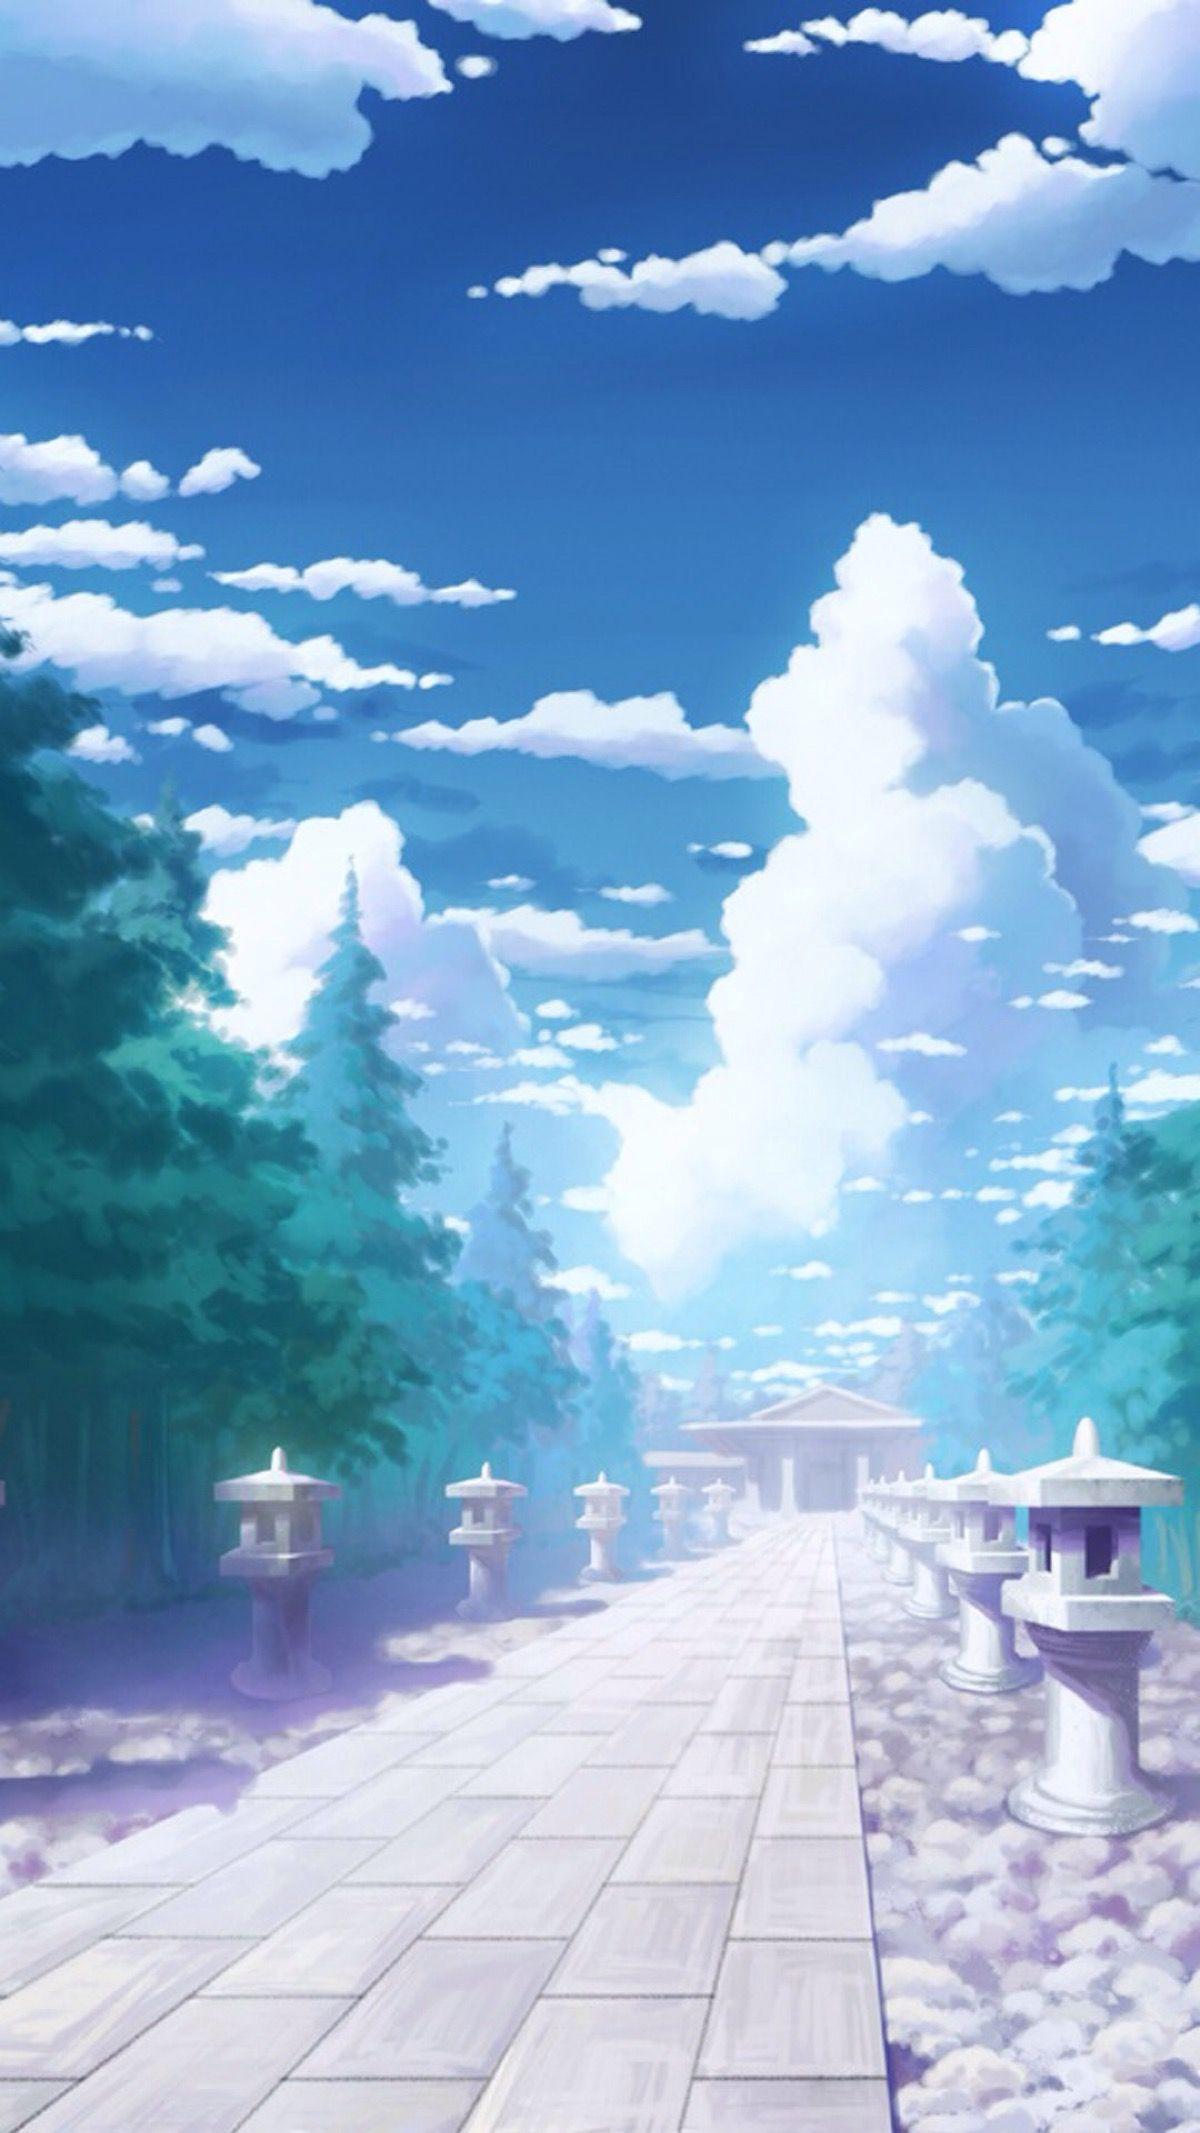 Anime Landscape Phone Wallpapers Top Free Anime Landscape Phone